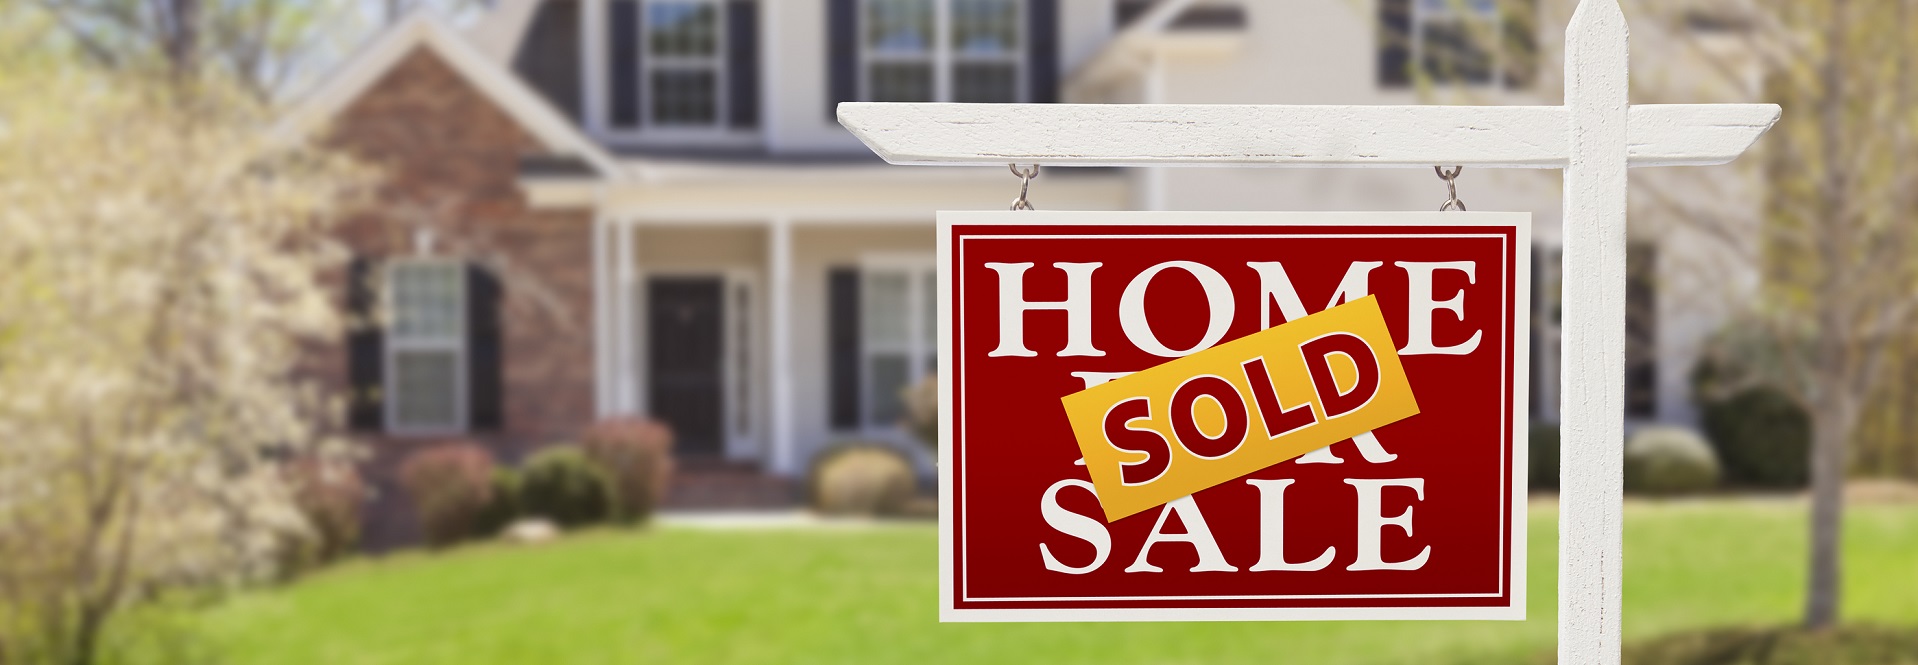 How to be a Wa Real Estate Agent
